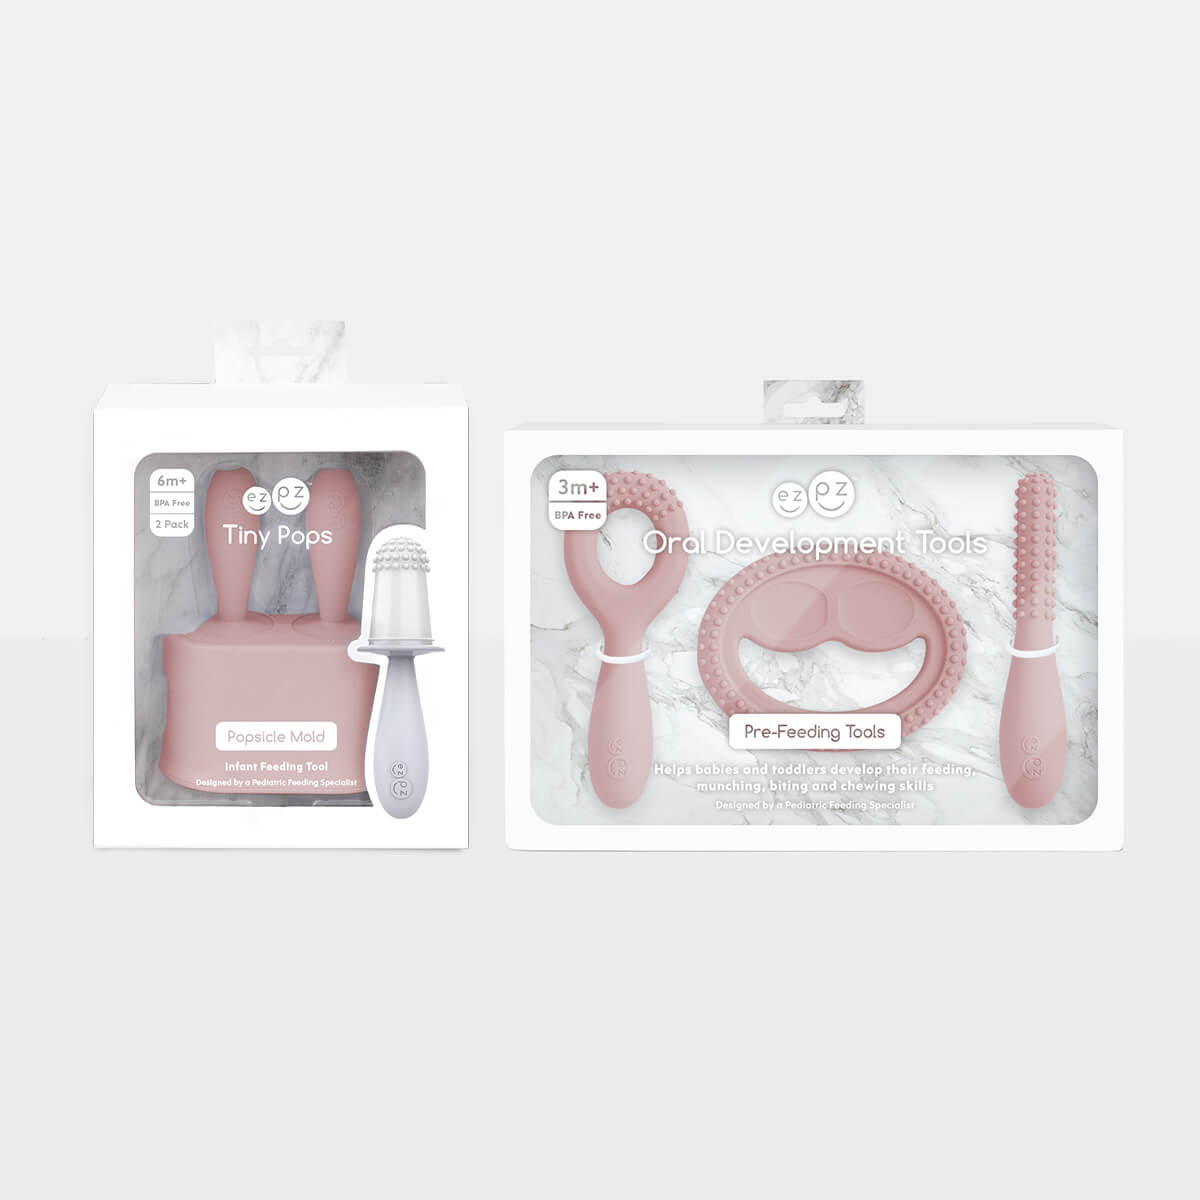 Pre-feeding set by ezpz in blush pink includes the tiny pops and oral development tools (silicone teethers)